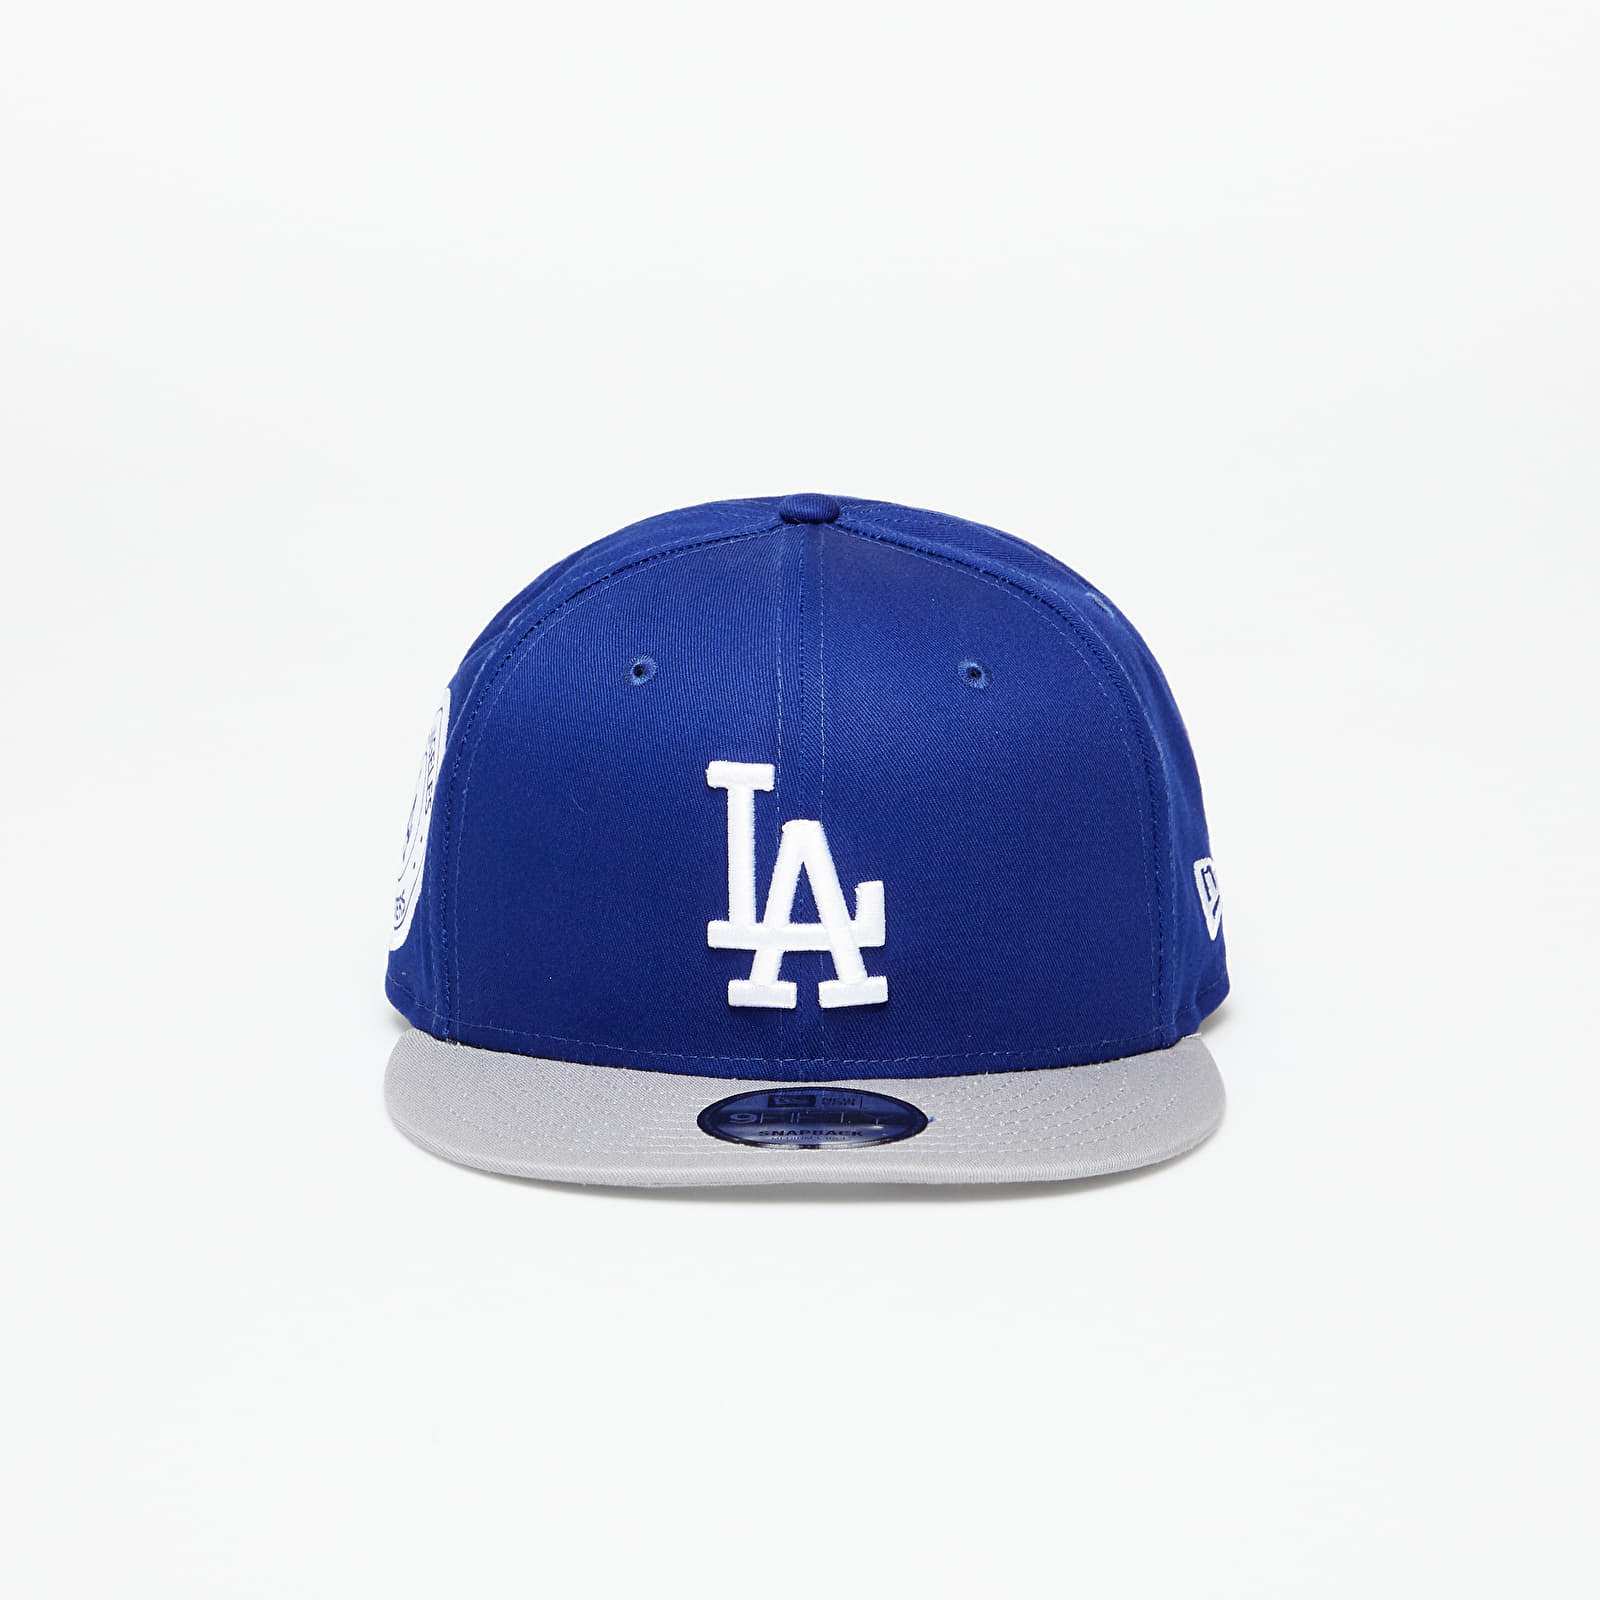 New Era - los angeles dodgers contrast side patch 9fifty snapback cap dark royal/ gray